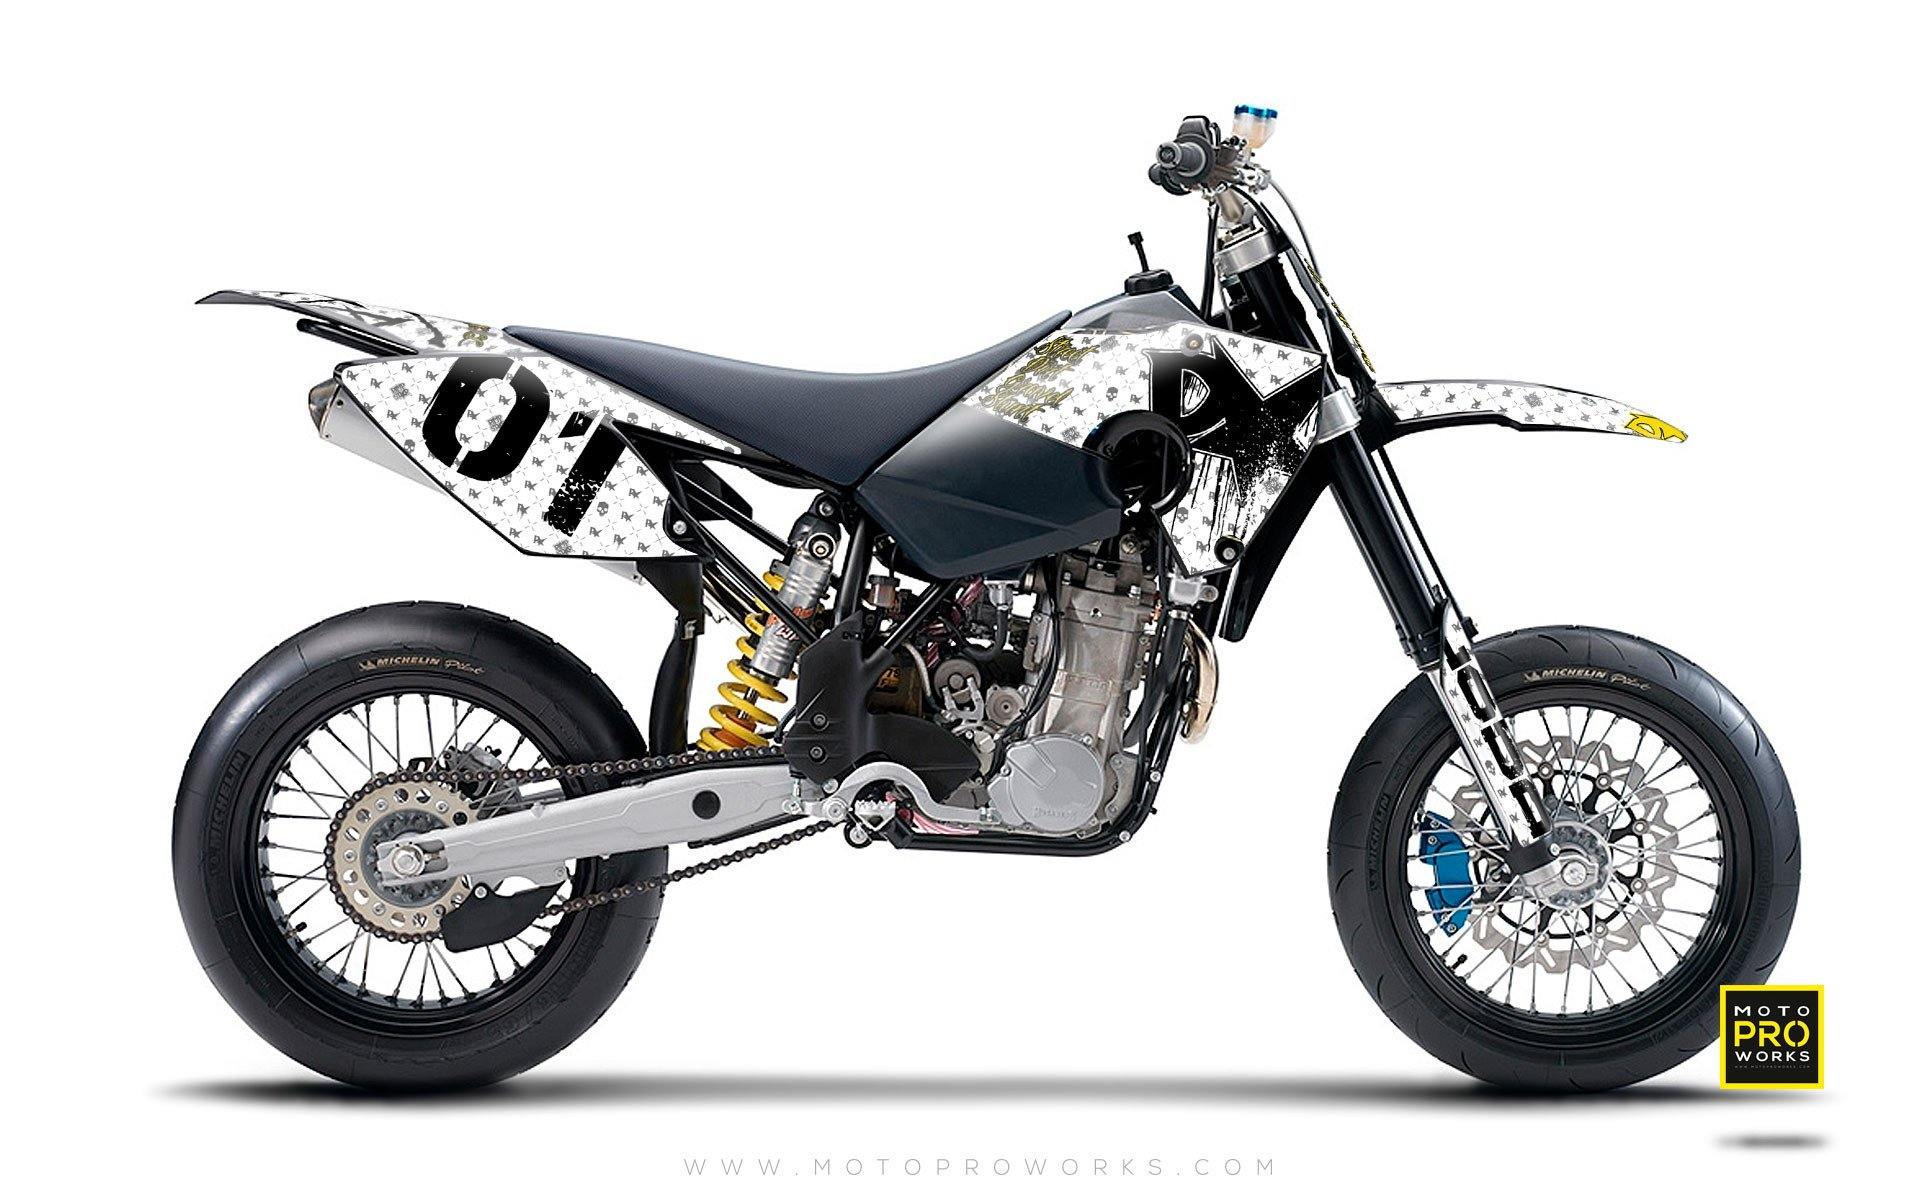 Husaberg GRAPHIC KIT - "STEALTHER" (white) - MotoProWorks | Decals and Bike Graphic kit